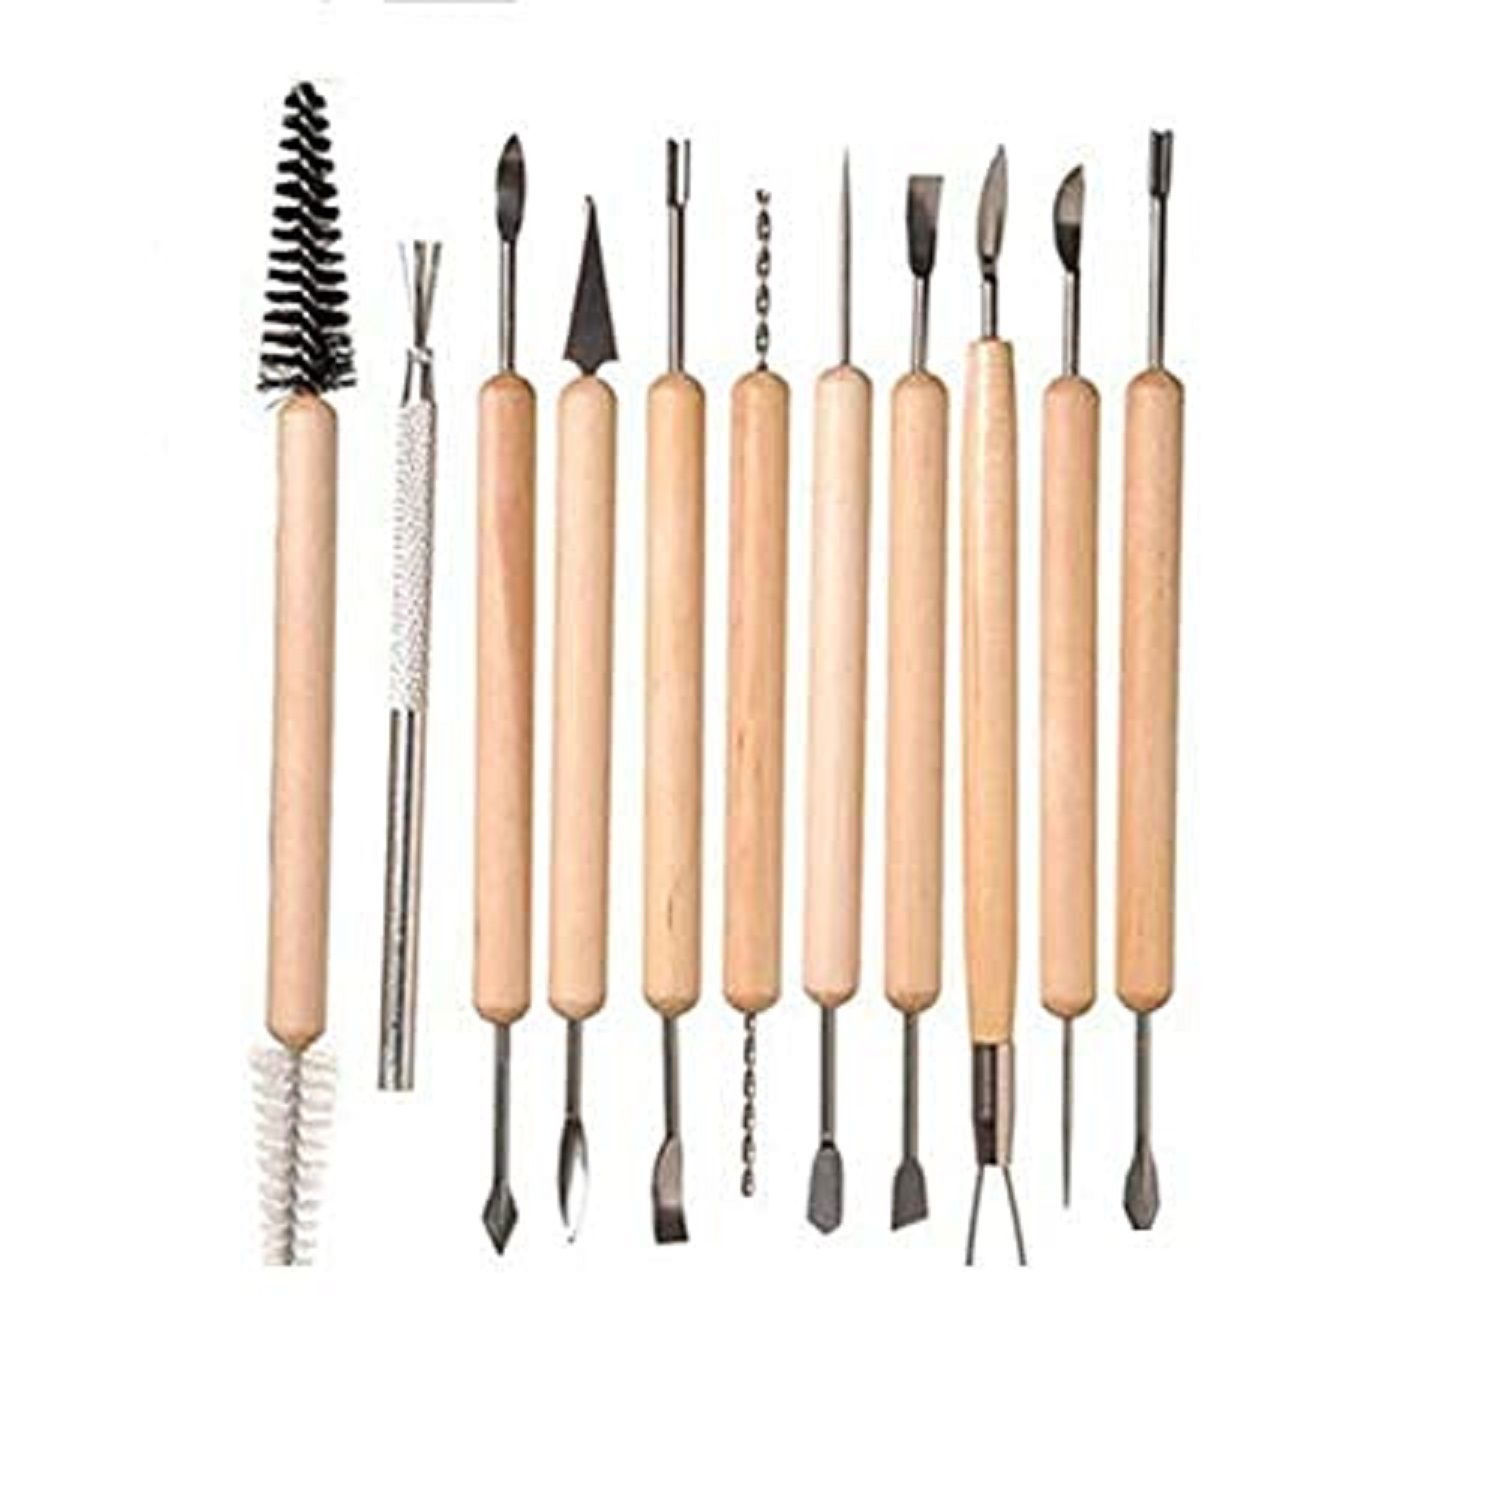     			Rangwell 11pc/Set Wood Polymer Clay Wax Soap Sculpting Modelling Double Ended Sculpture DIY Tools for Clay Pottery Carving Modeling